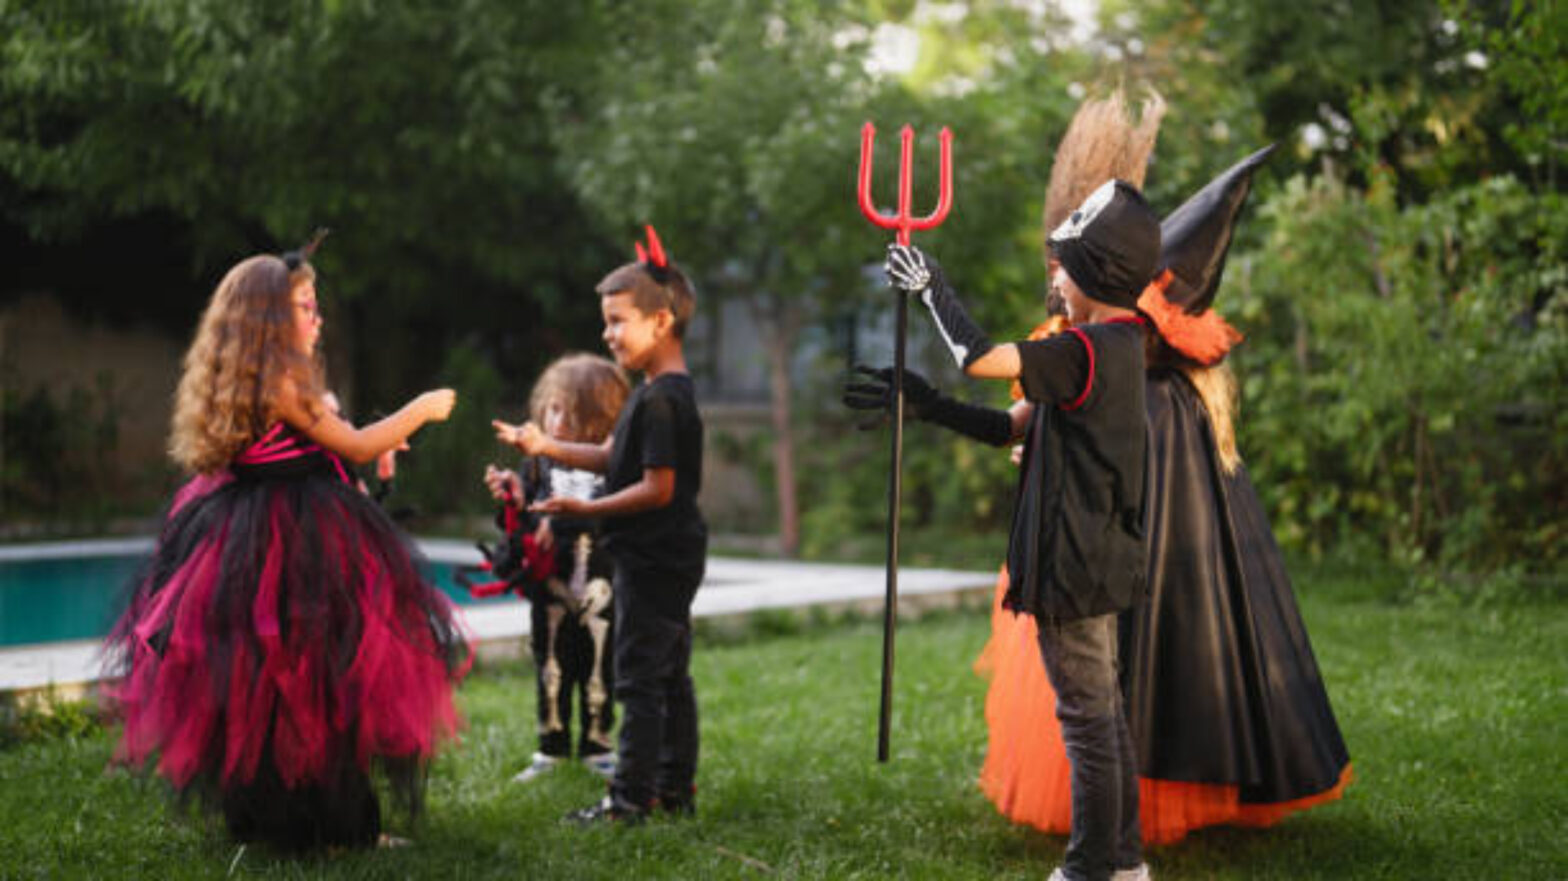 Halloween Day 2023 - Bring Out the Hidden Potential of Your Little Ones